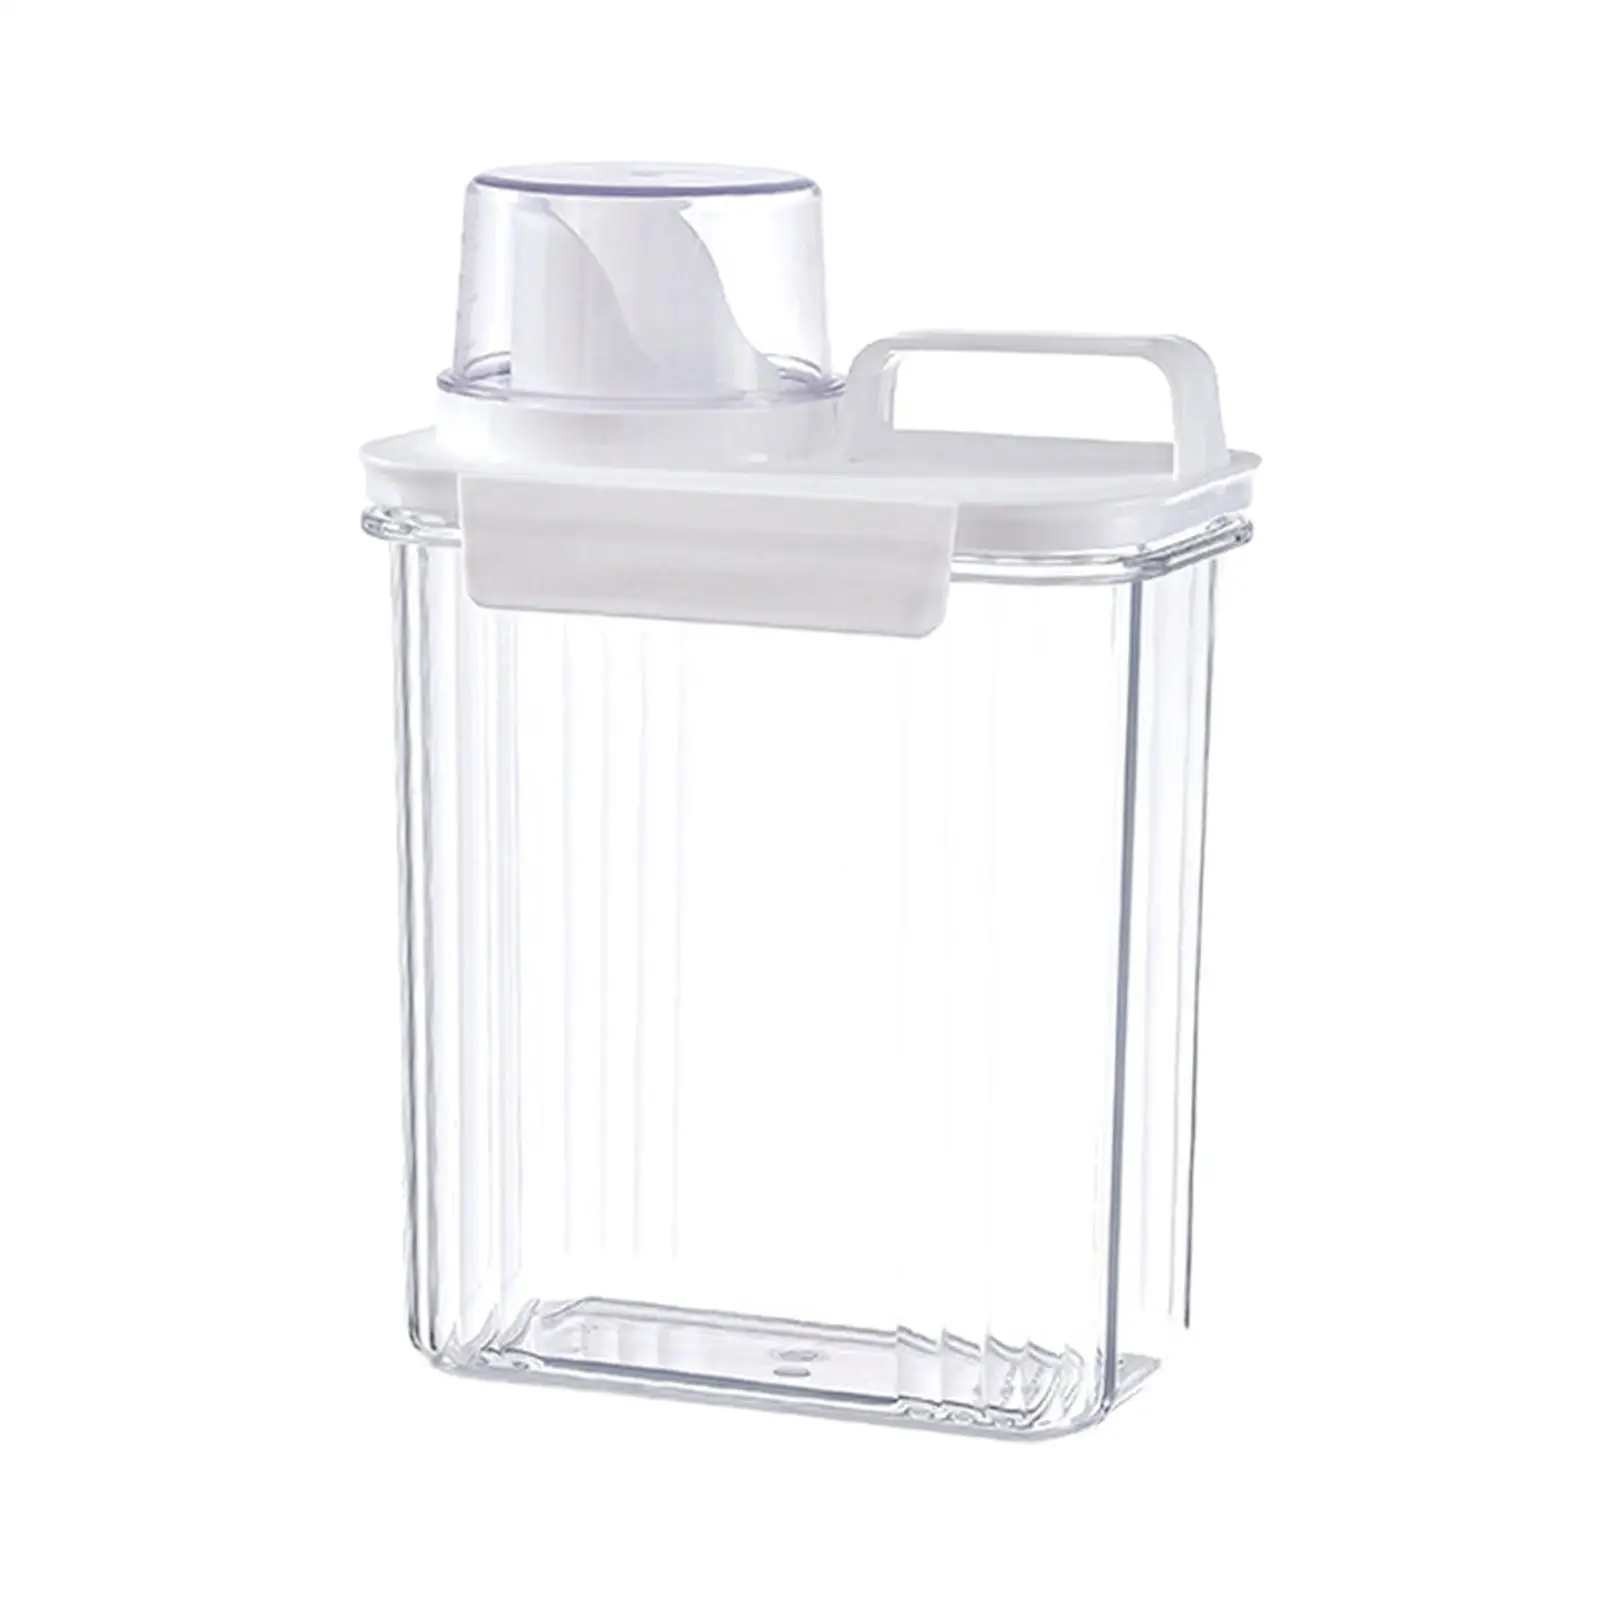 Washing Powder Containers Transparent for Countertop Laundry Room Bathroom